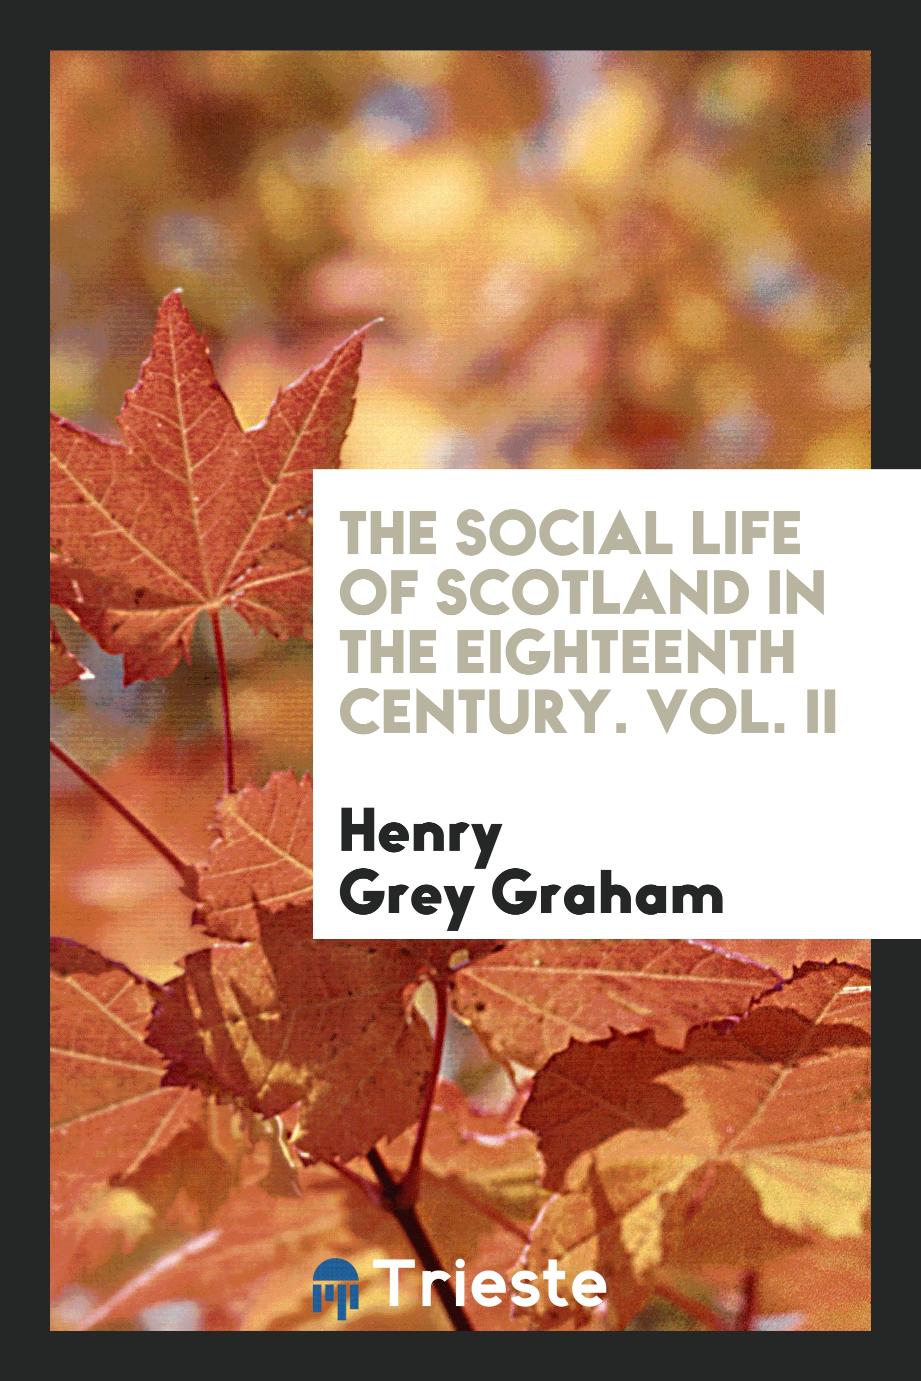 The Social Life of Scotland in the Eighteenth Century. Vol. II